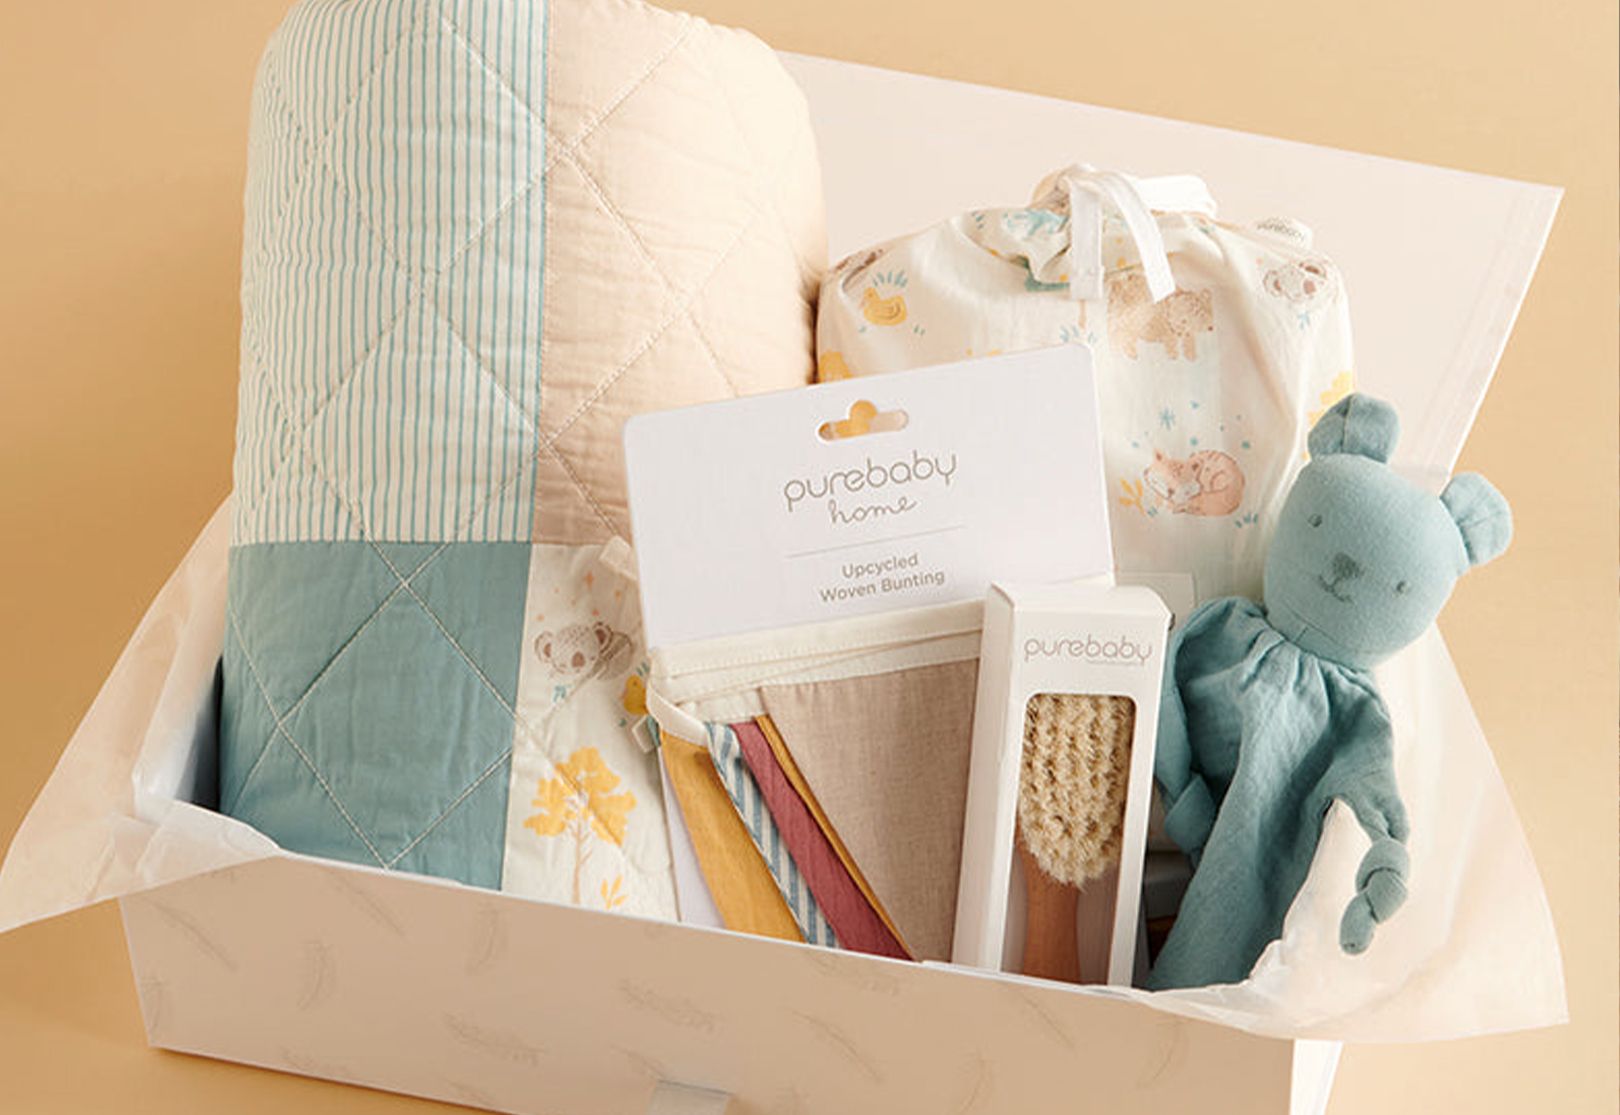 Unique Personalized Baby Gifts | Stork Baby Gift Baskets –  StorkBabyGiftBaskets.com